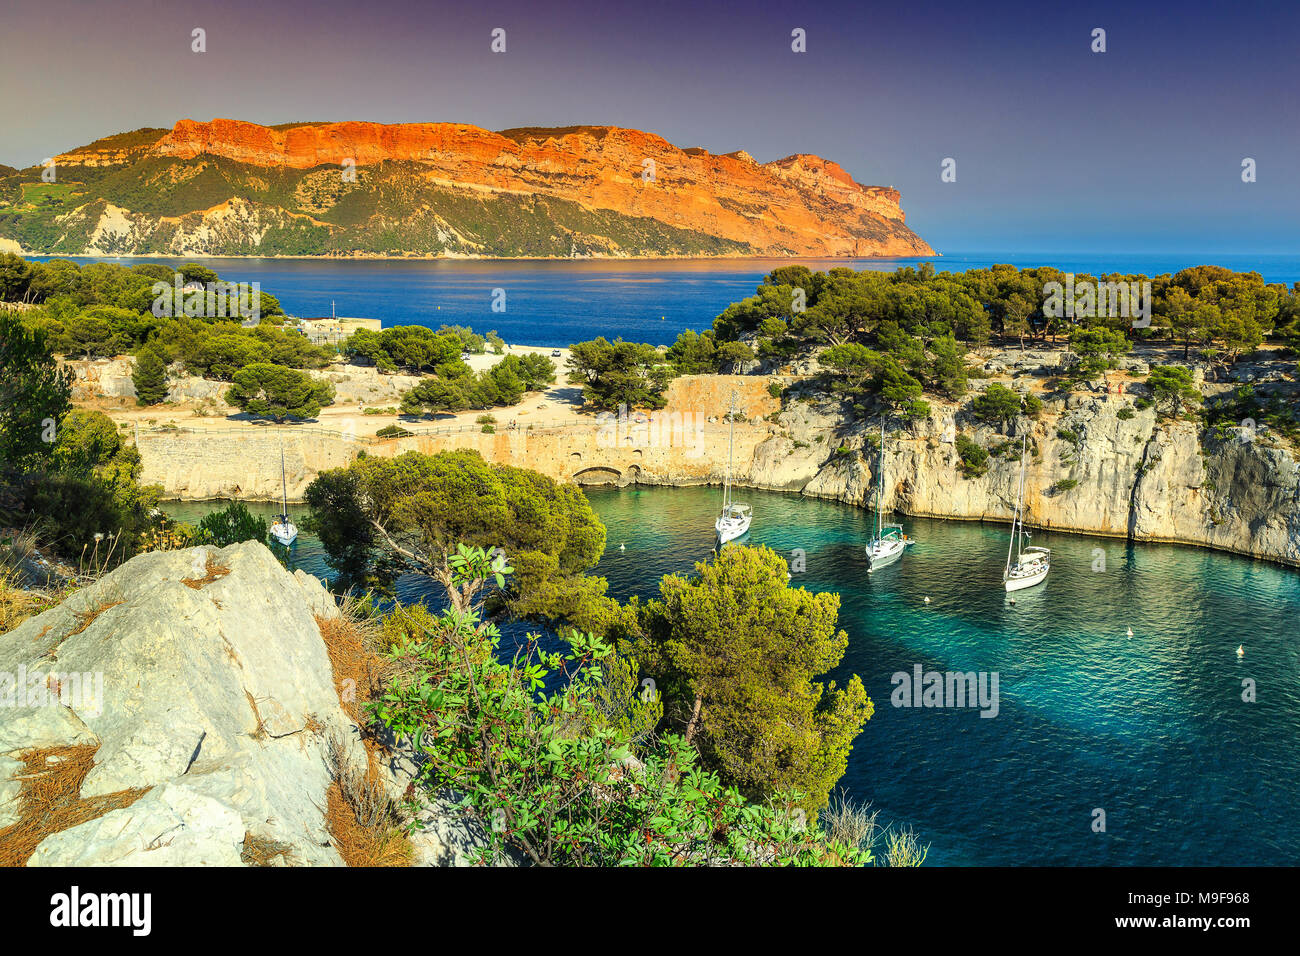 Amazing viewpoint on the cliffs, Calanques de Port Pin bay with yachts and sailing boats, Calanques National Park near Cassis fishing village, Provenc Stock Photo